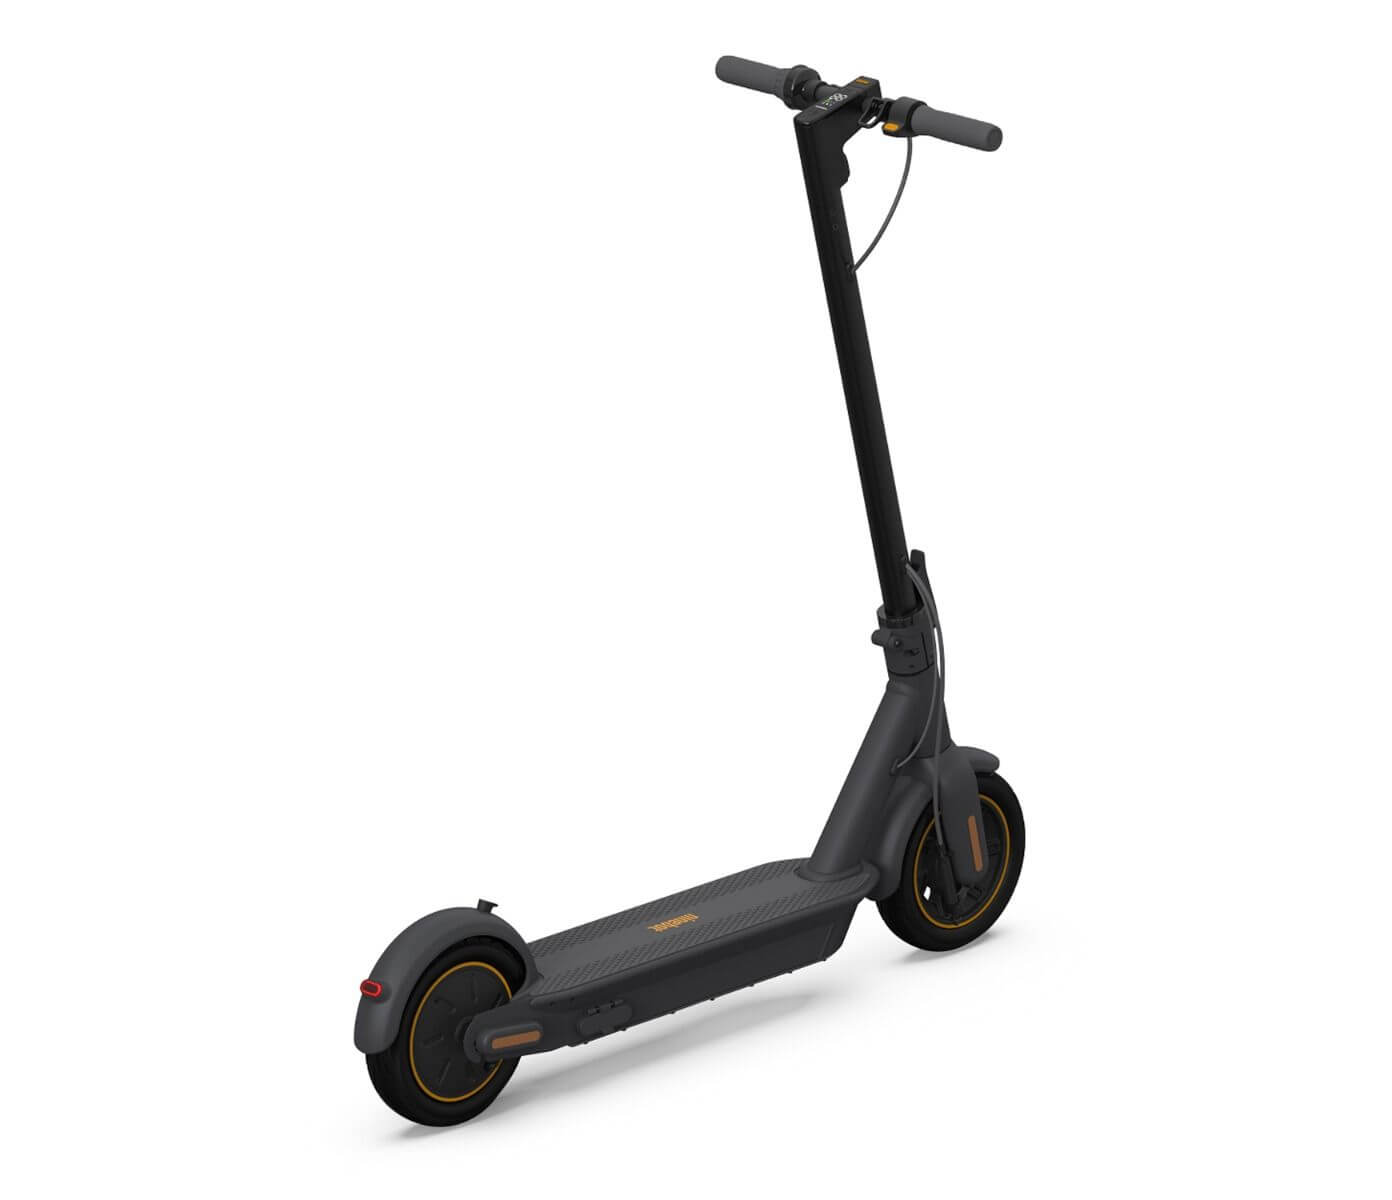 SEGWAY-NINEBOT MAX G30LE - Robocleaners